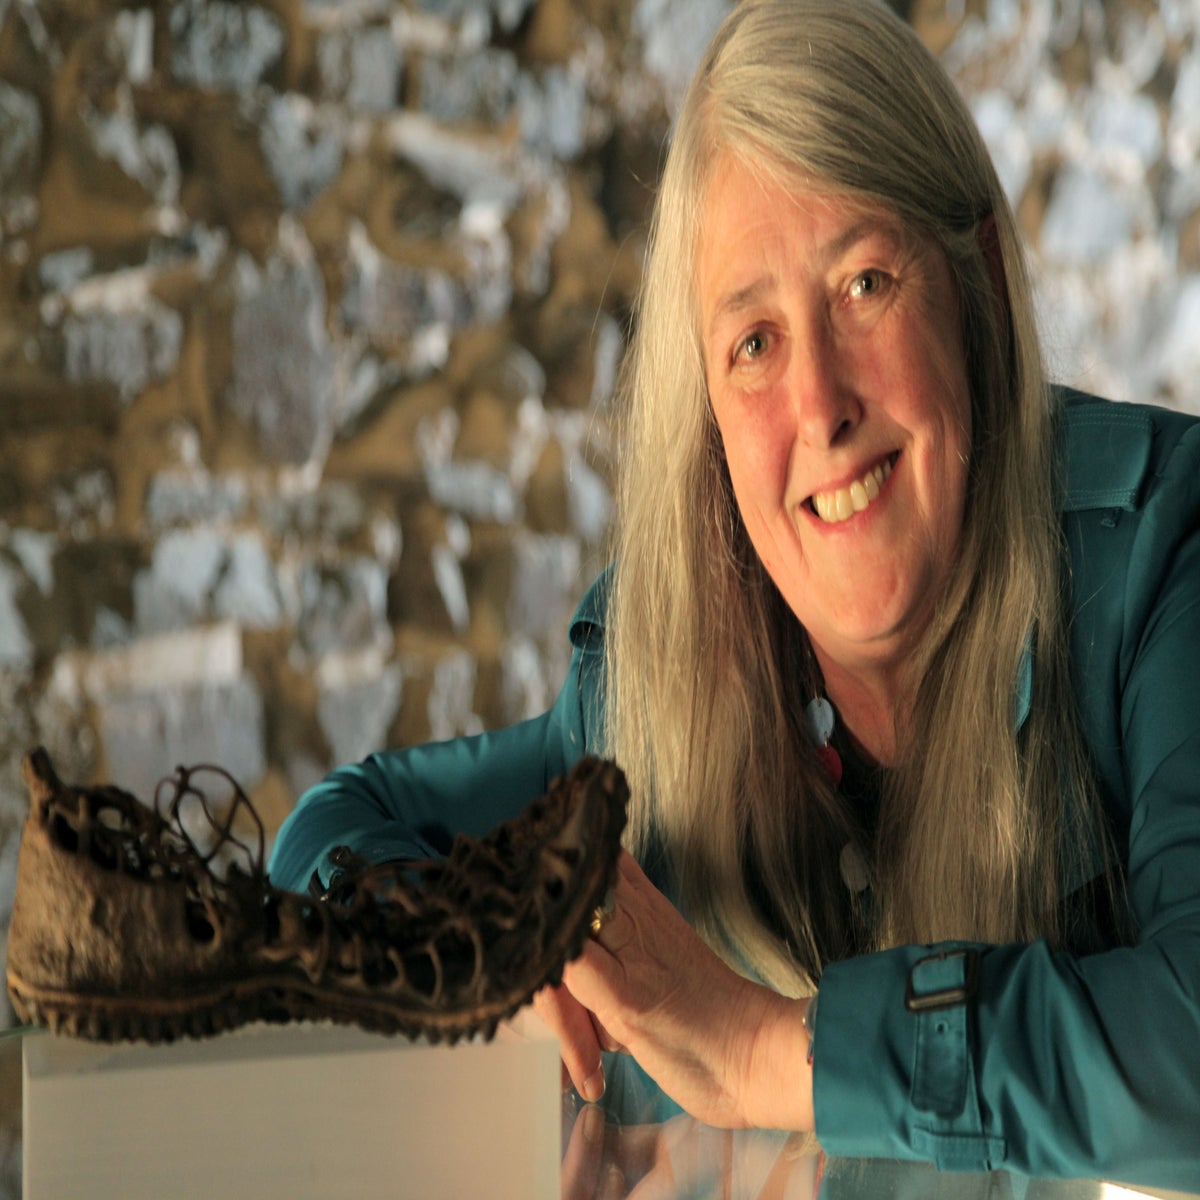 Historian Mary Beard connects Greek myths and Twitter trolls